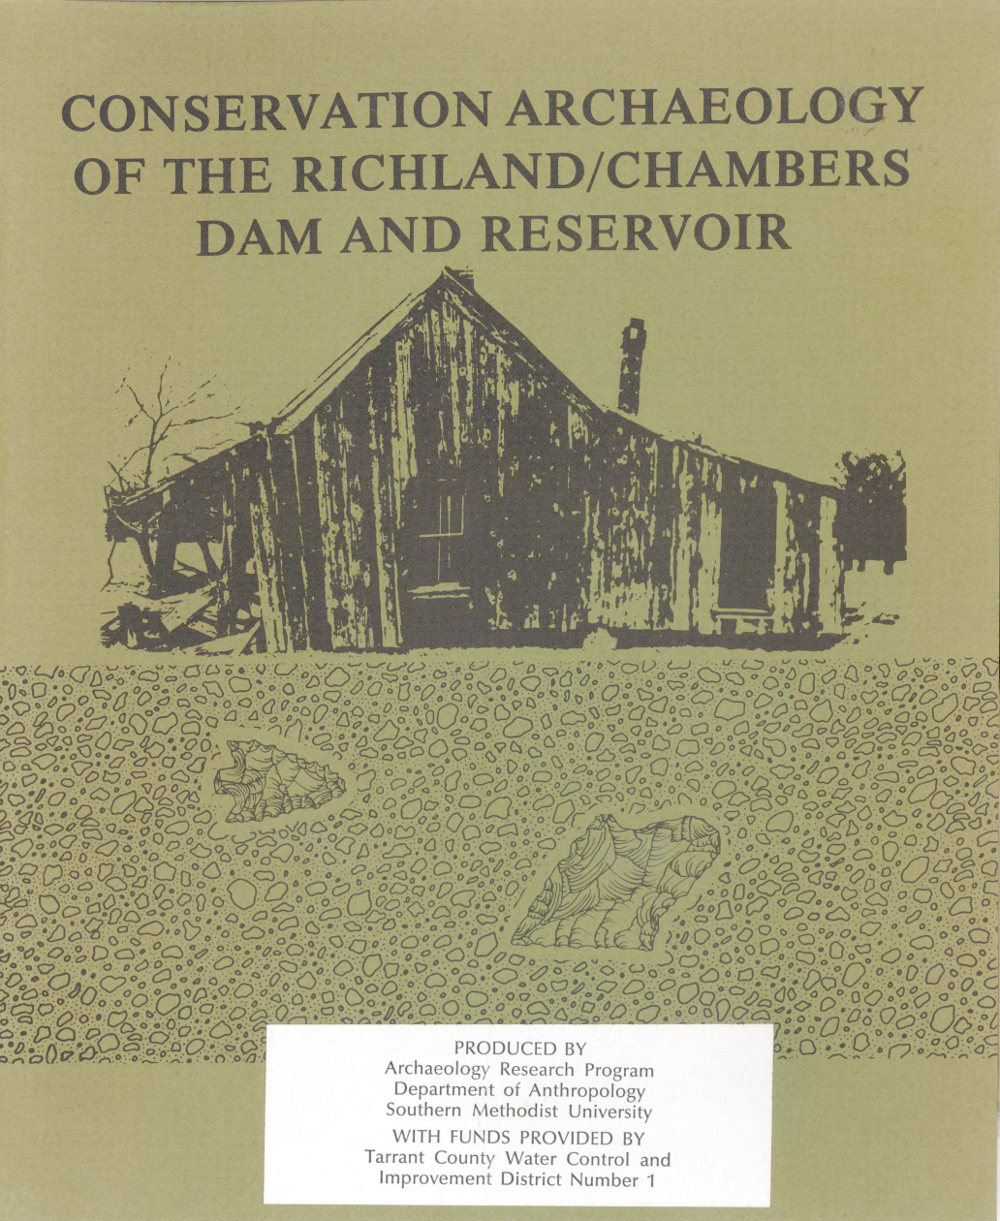 Conservation Archaeology of the Richland/Chambers Dam and Reservoir